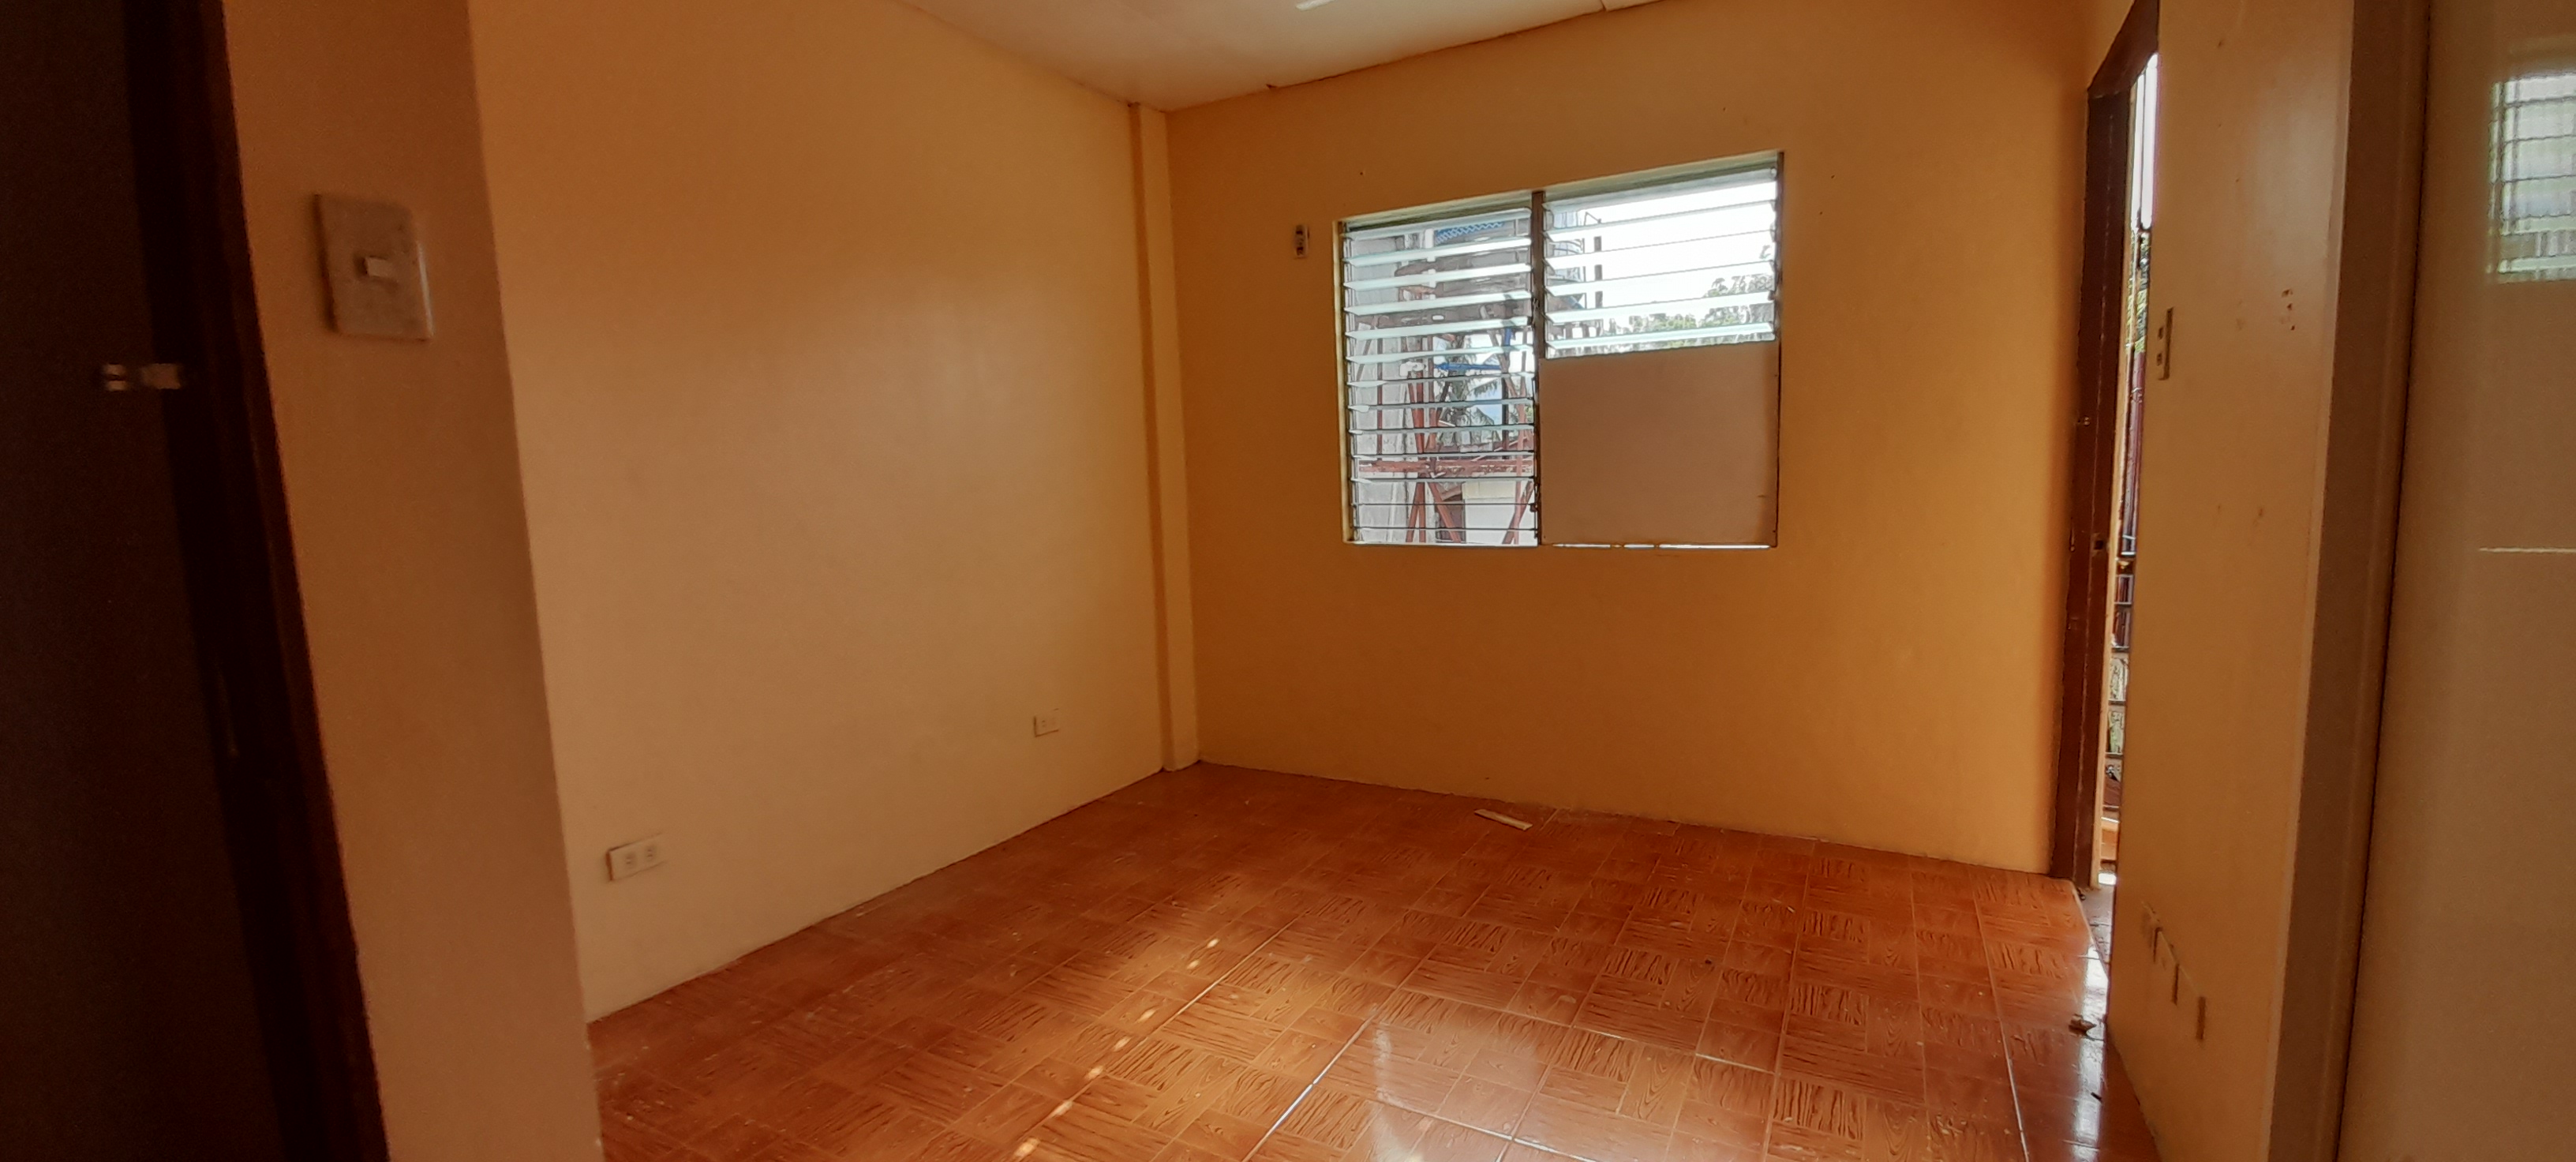 4-bedroom-unfurnished-apartment-can-be-staff-house-or-office-use-in-mandaue-city